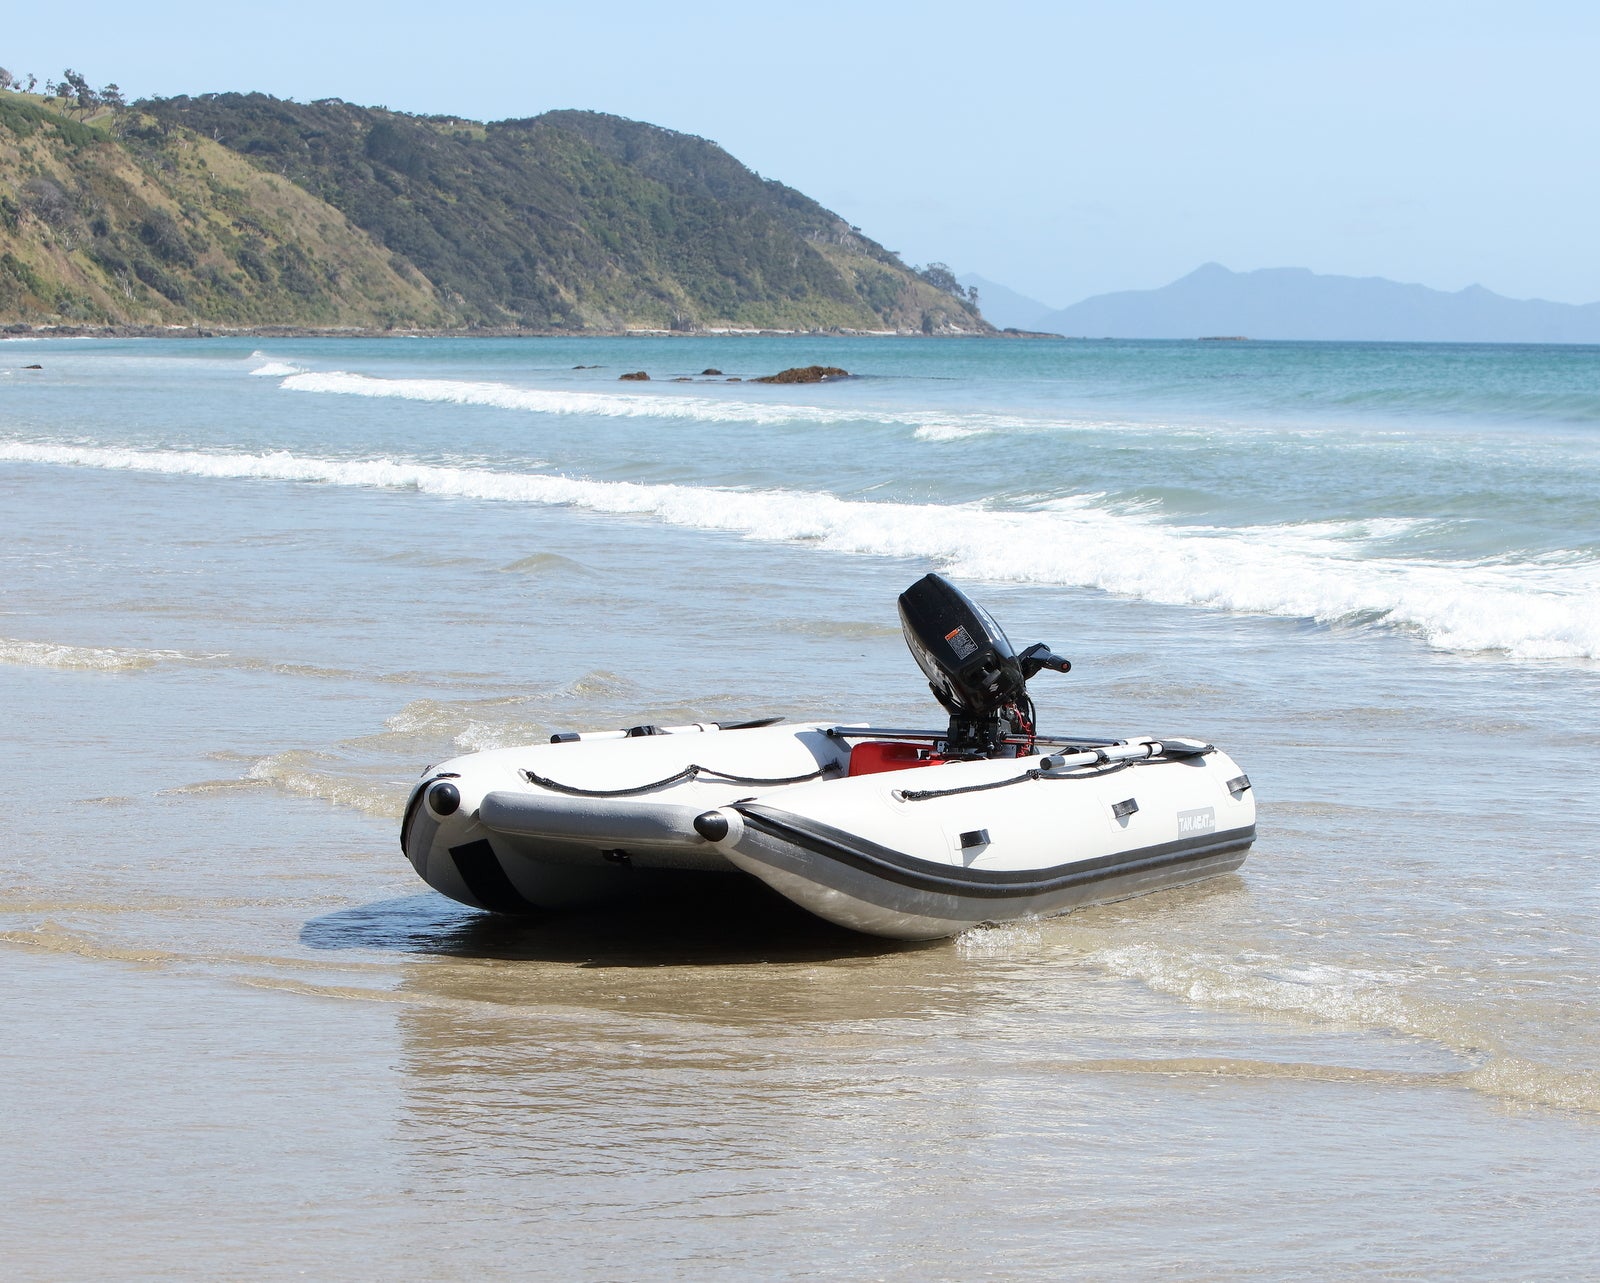 Portable Boat for an RV  Learn more about Takacat Boats - Takacat Americas